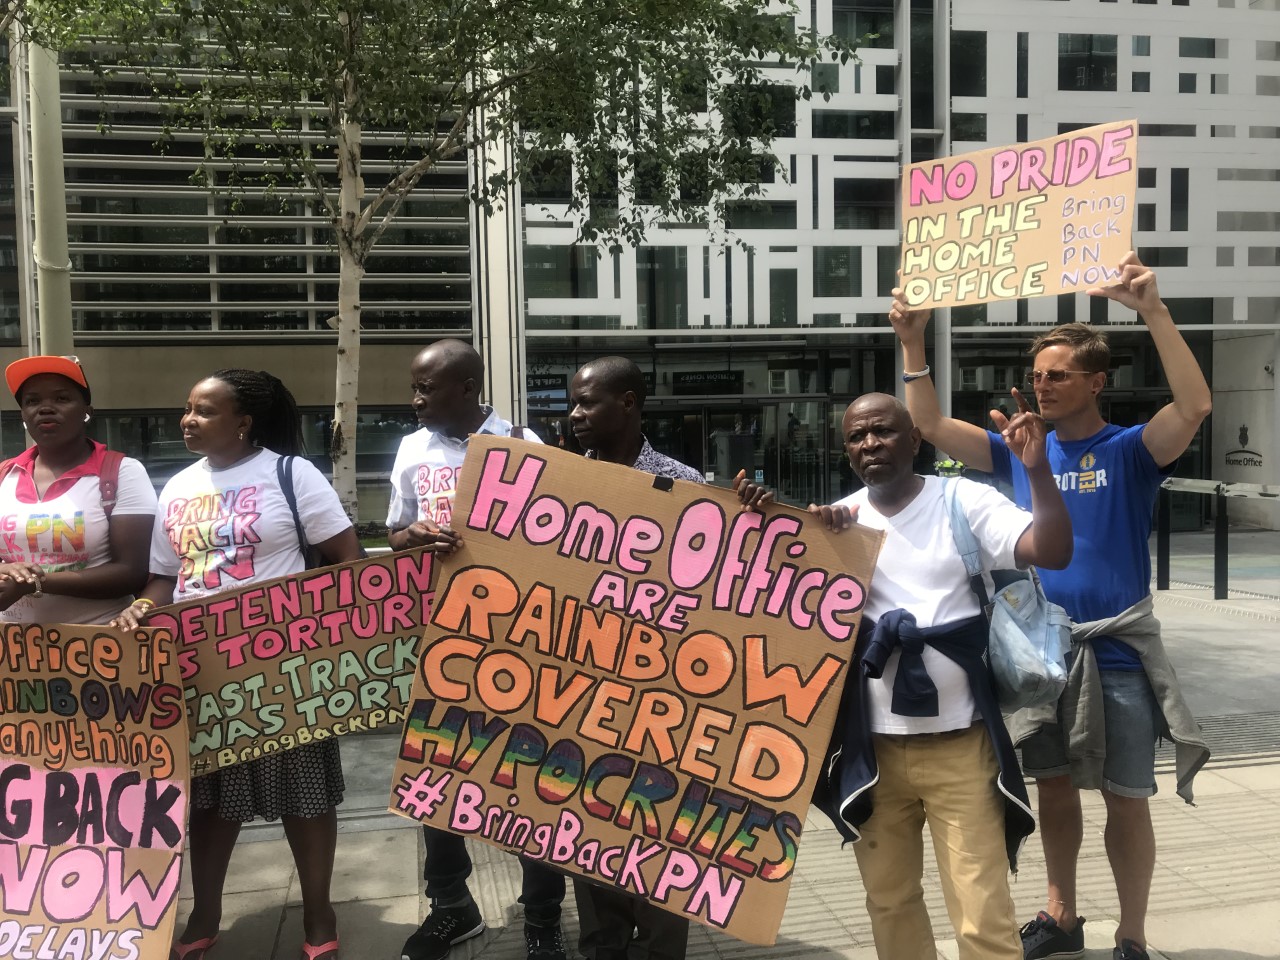 While celebrating Pride, Home Office blocks return of wrongly deported lesbian living in fear